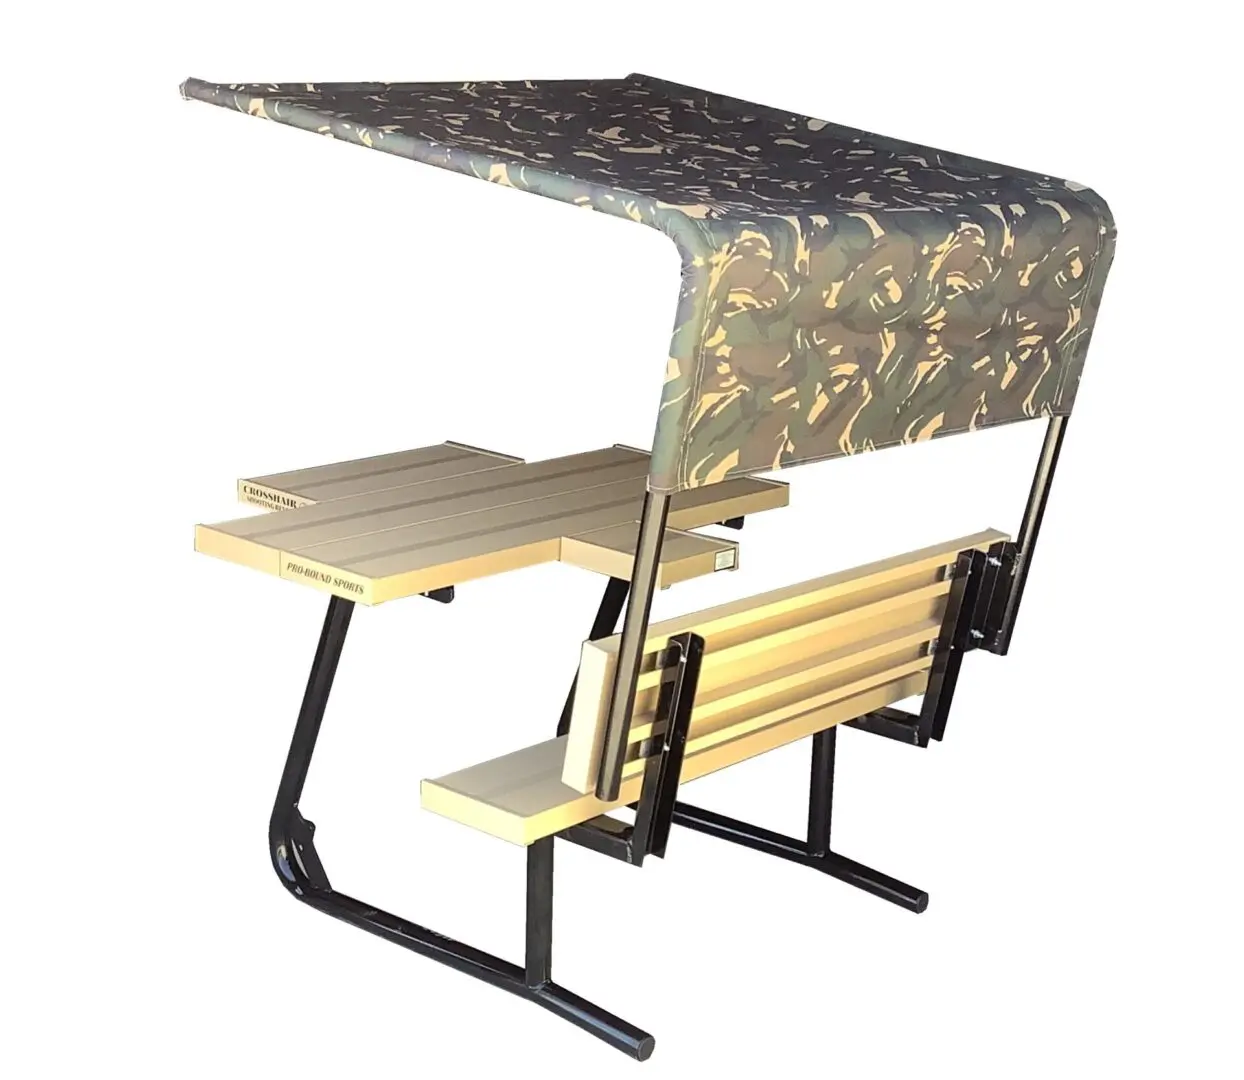 shooting bench with shade system to protect users